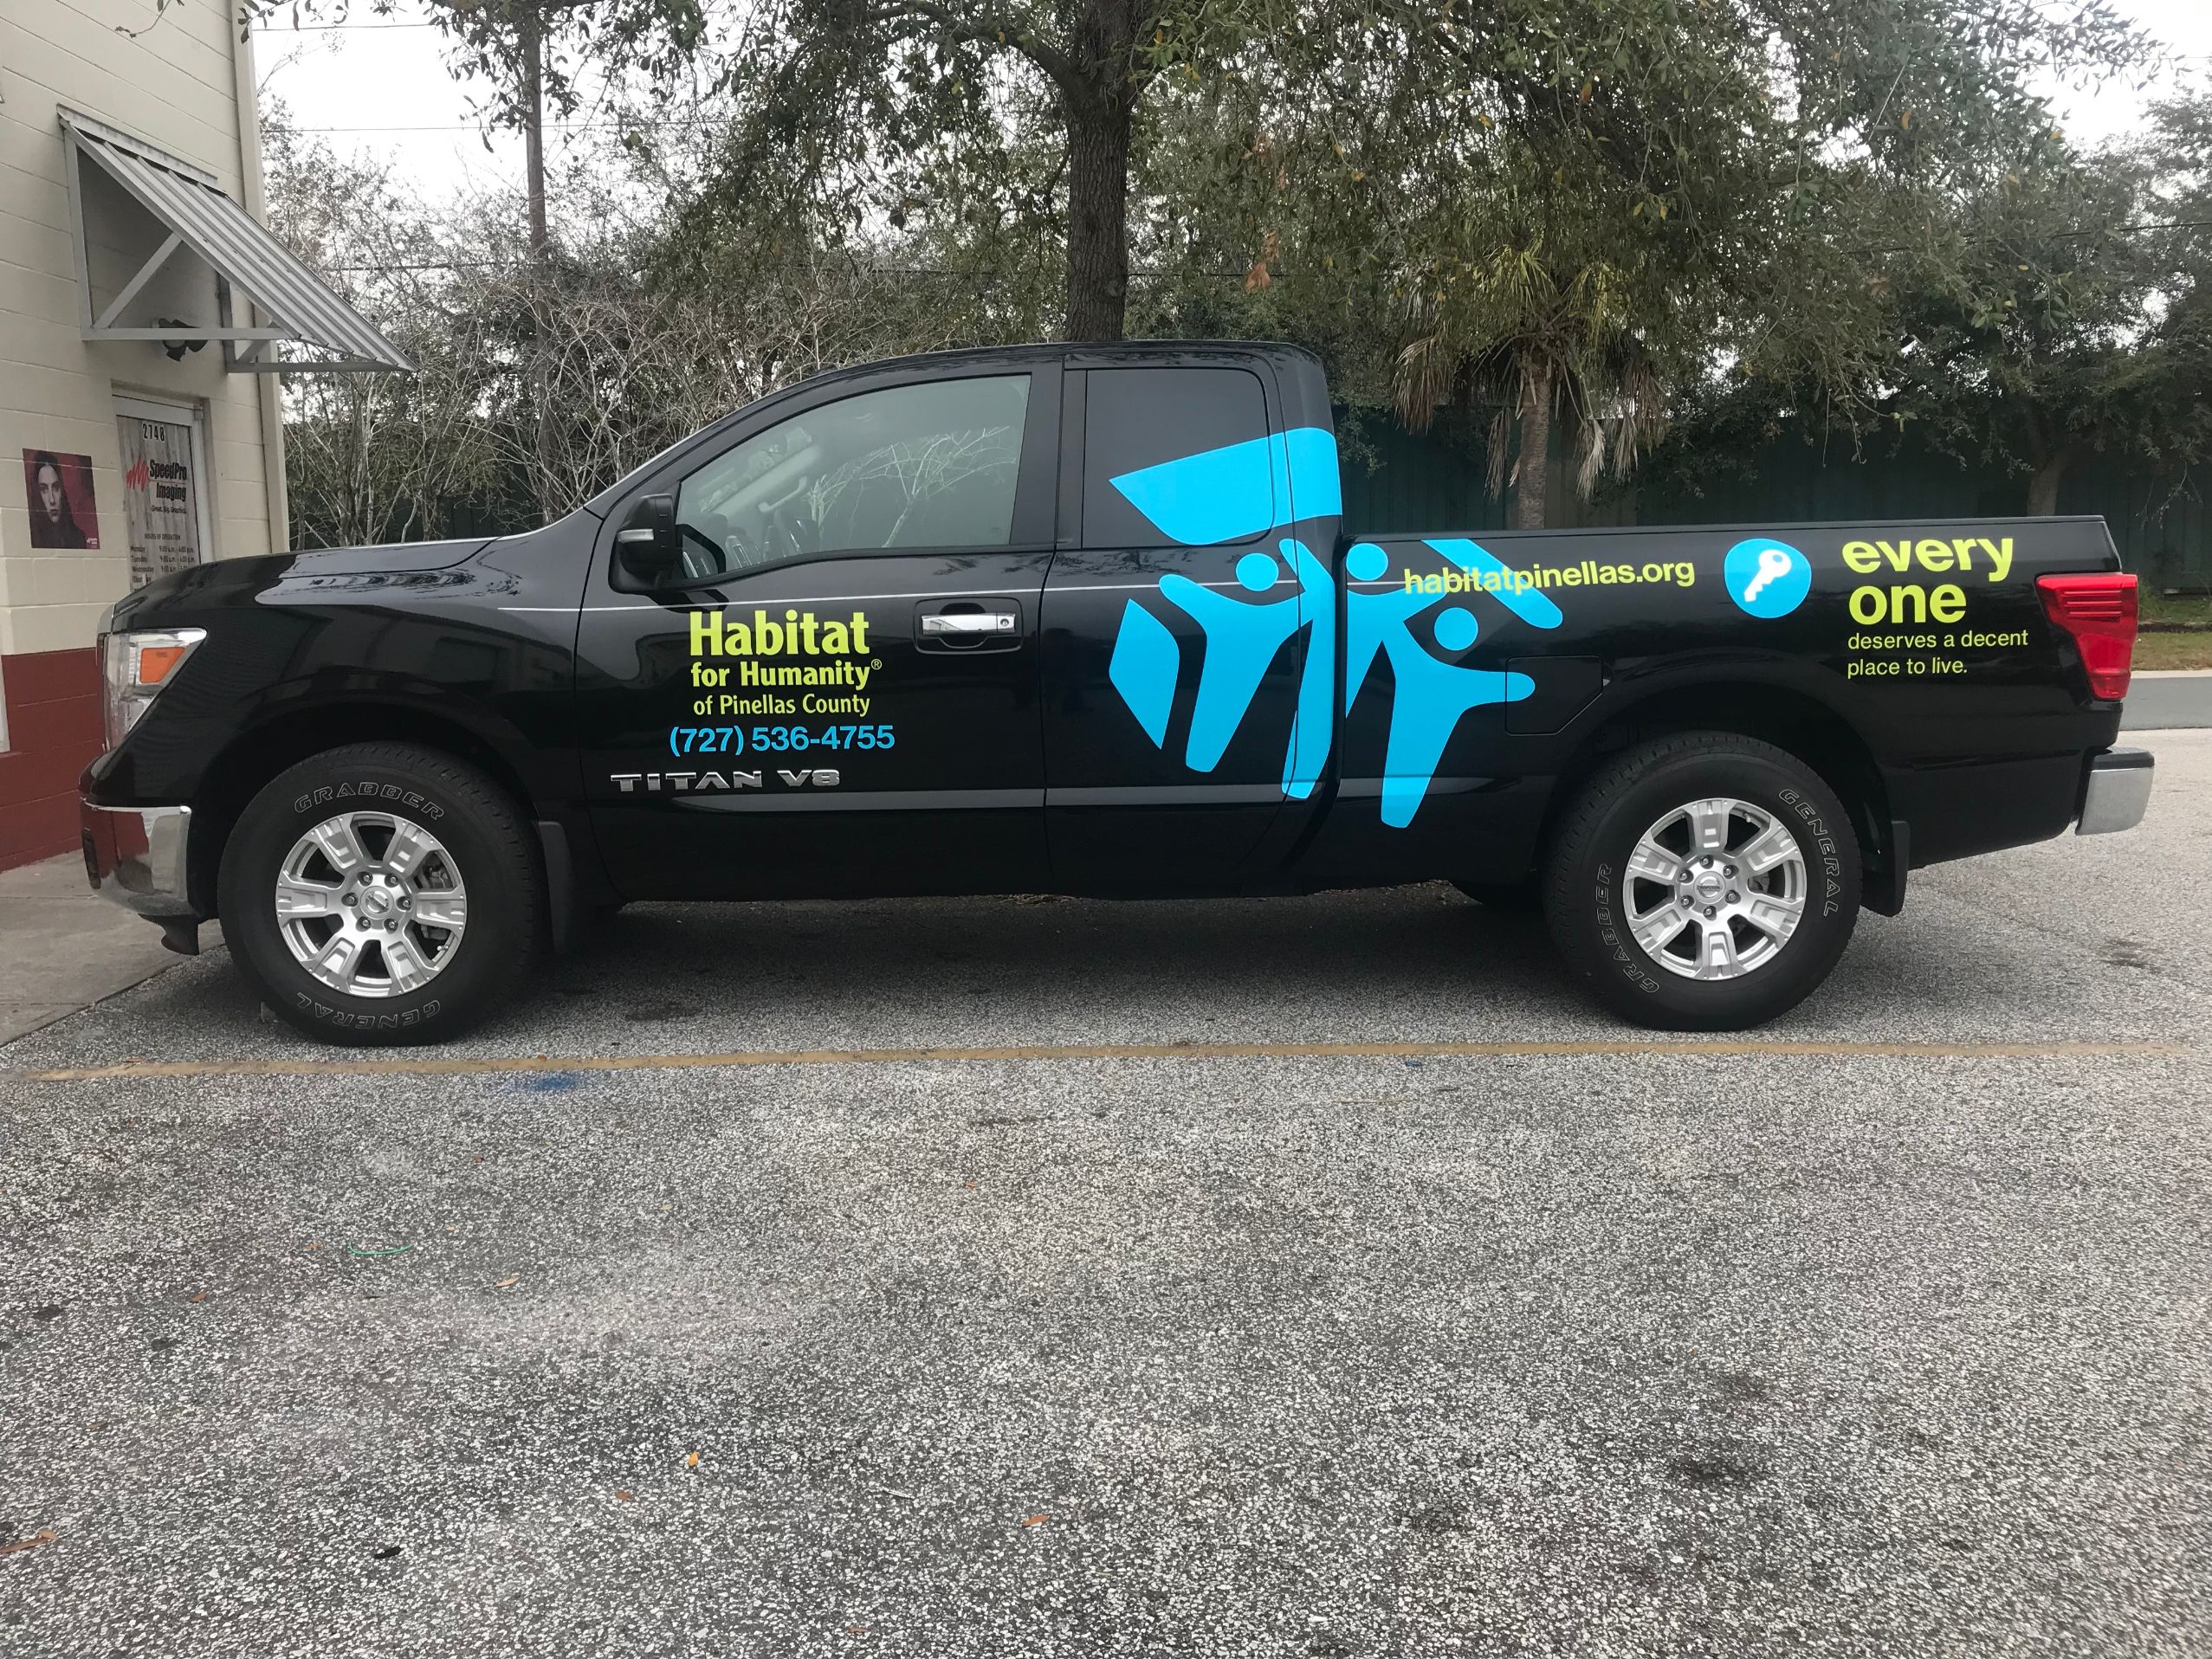 Habitat for Humanity of Pinellas County truck wrap 